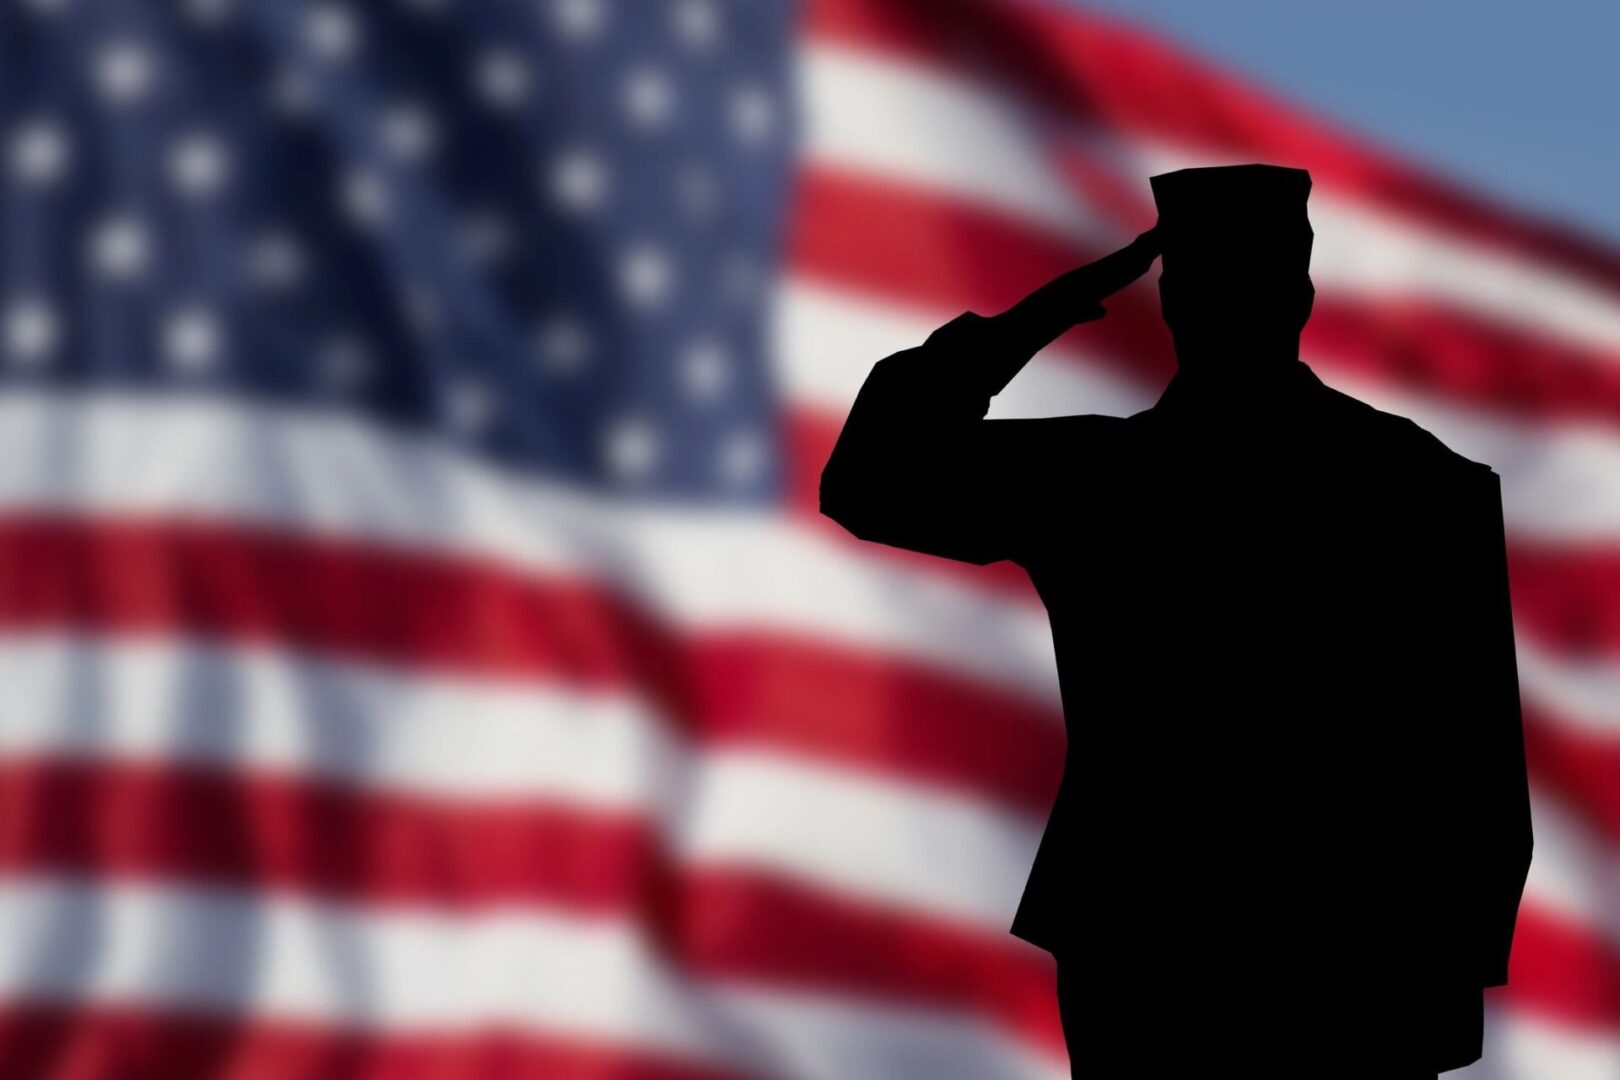 Soldier saluting in front of American flag.